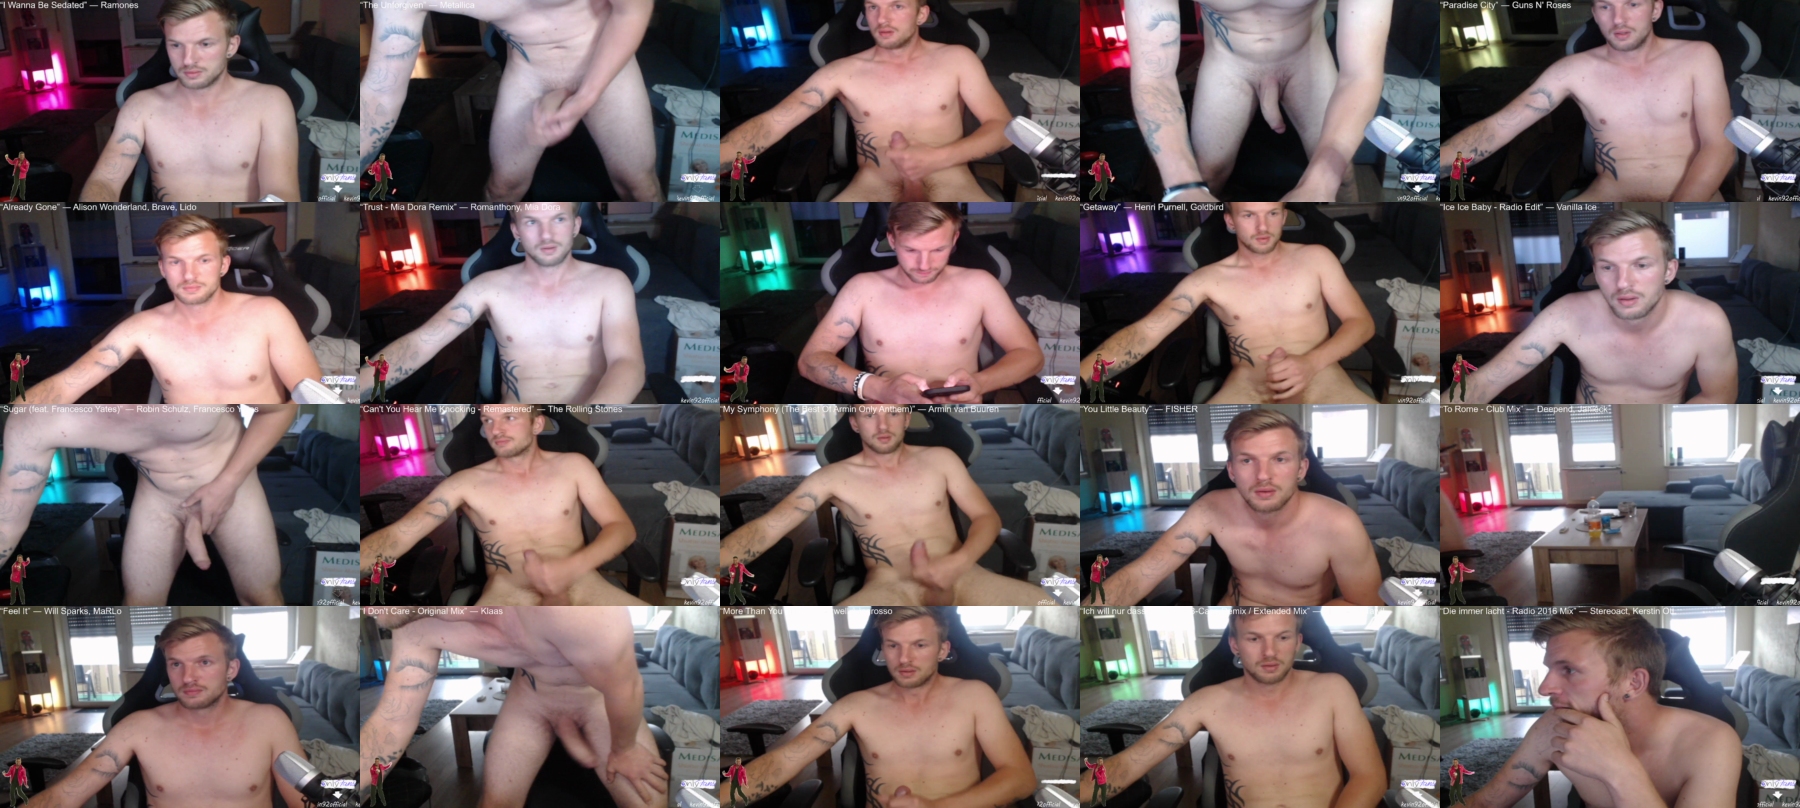 Justinxl23m  02-09-2021 Recorded Video Nude